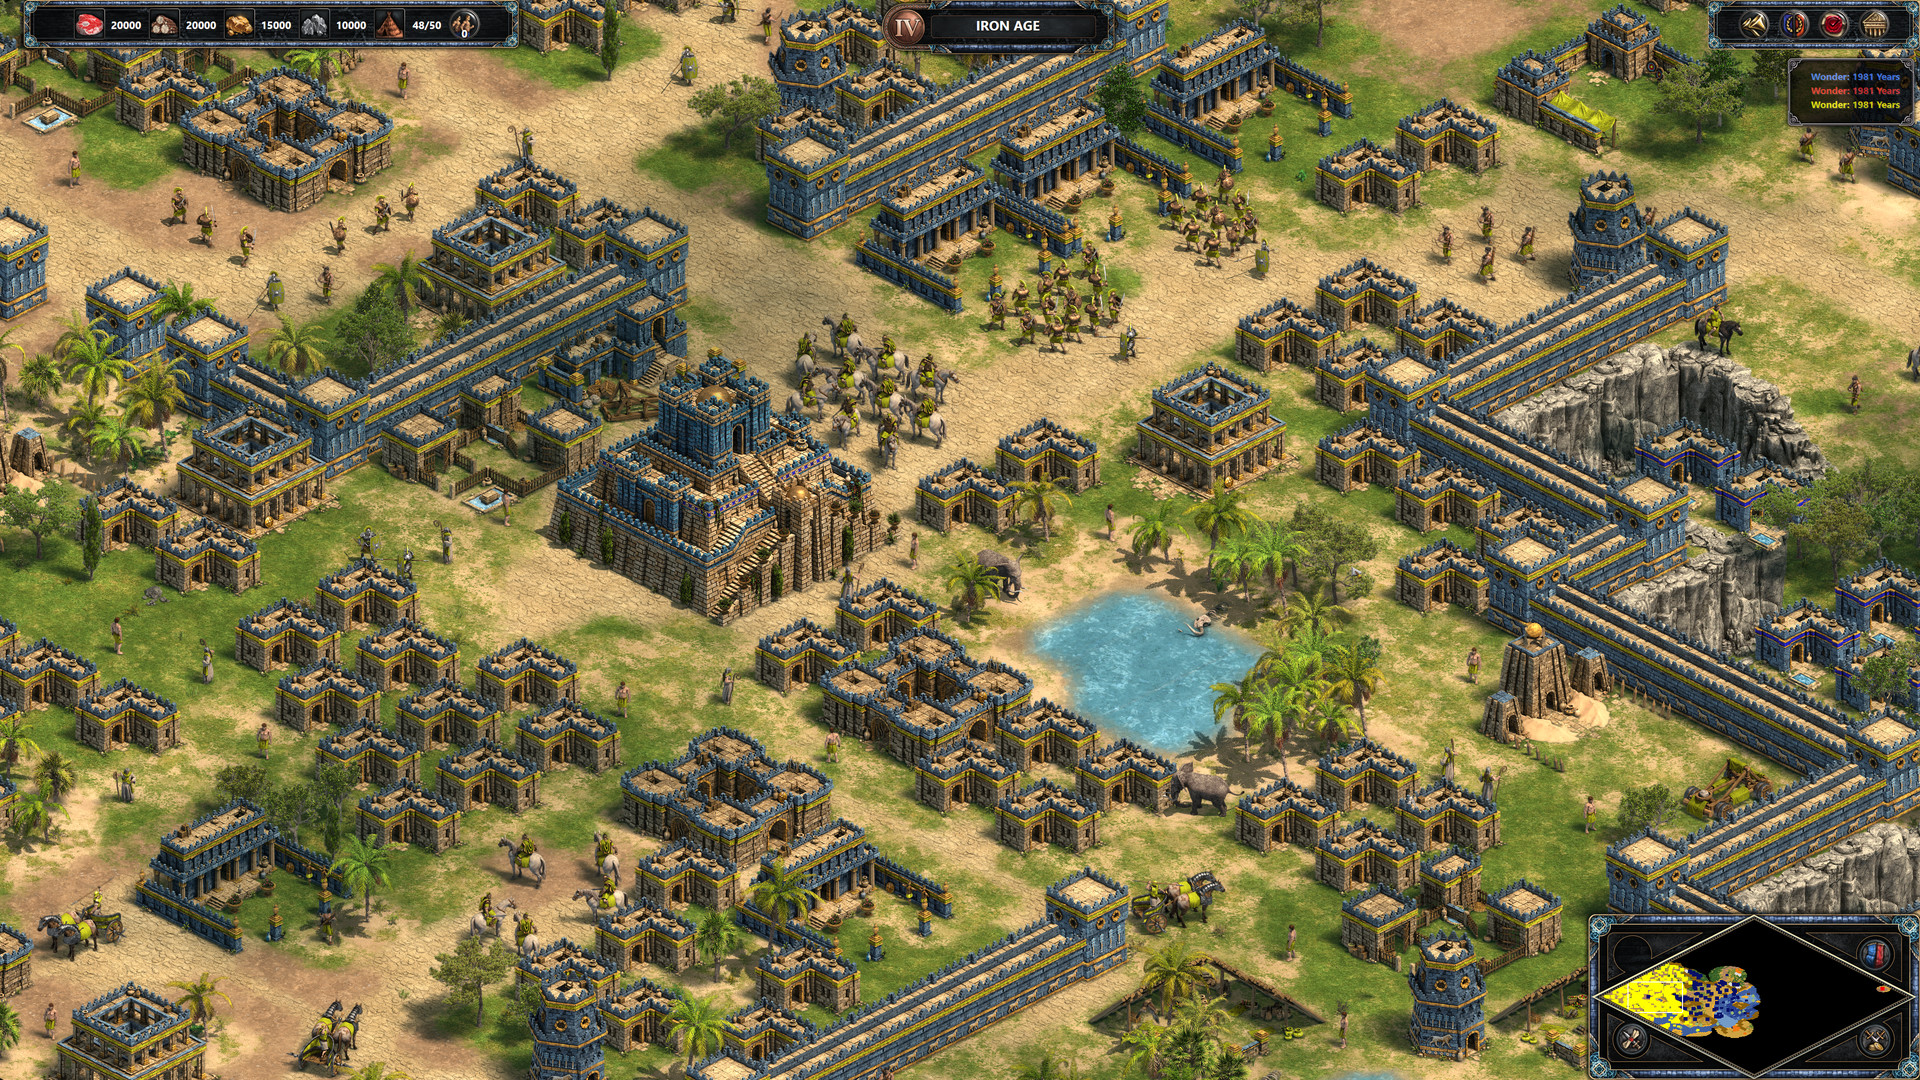 Age of Empires: Definitive Edition on Steam